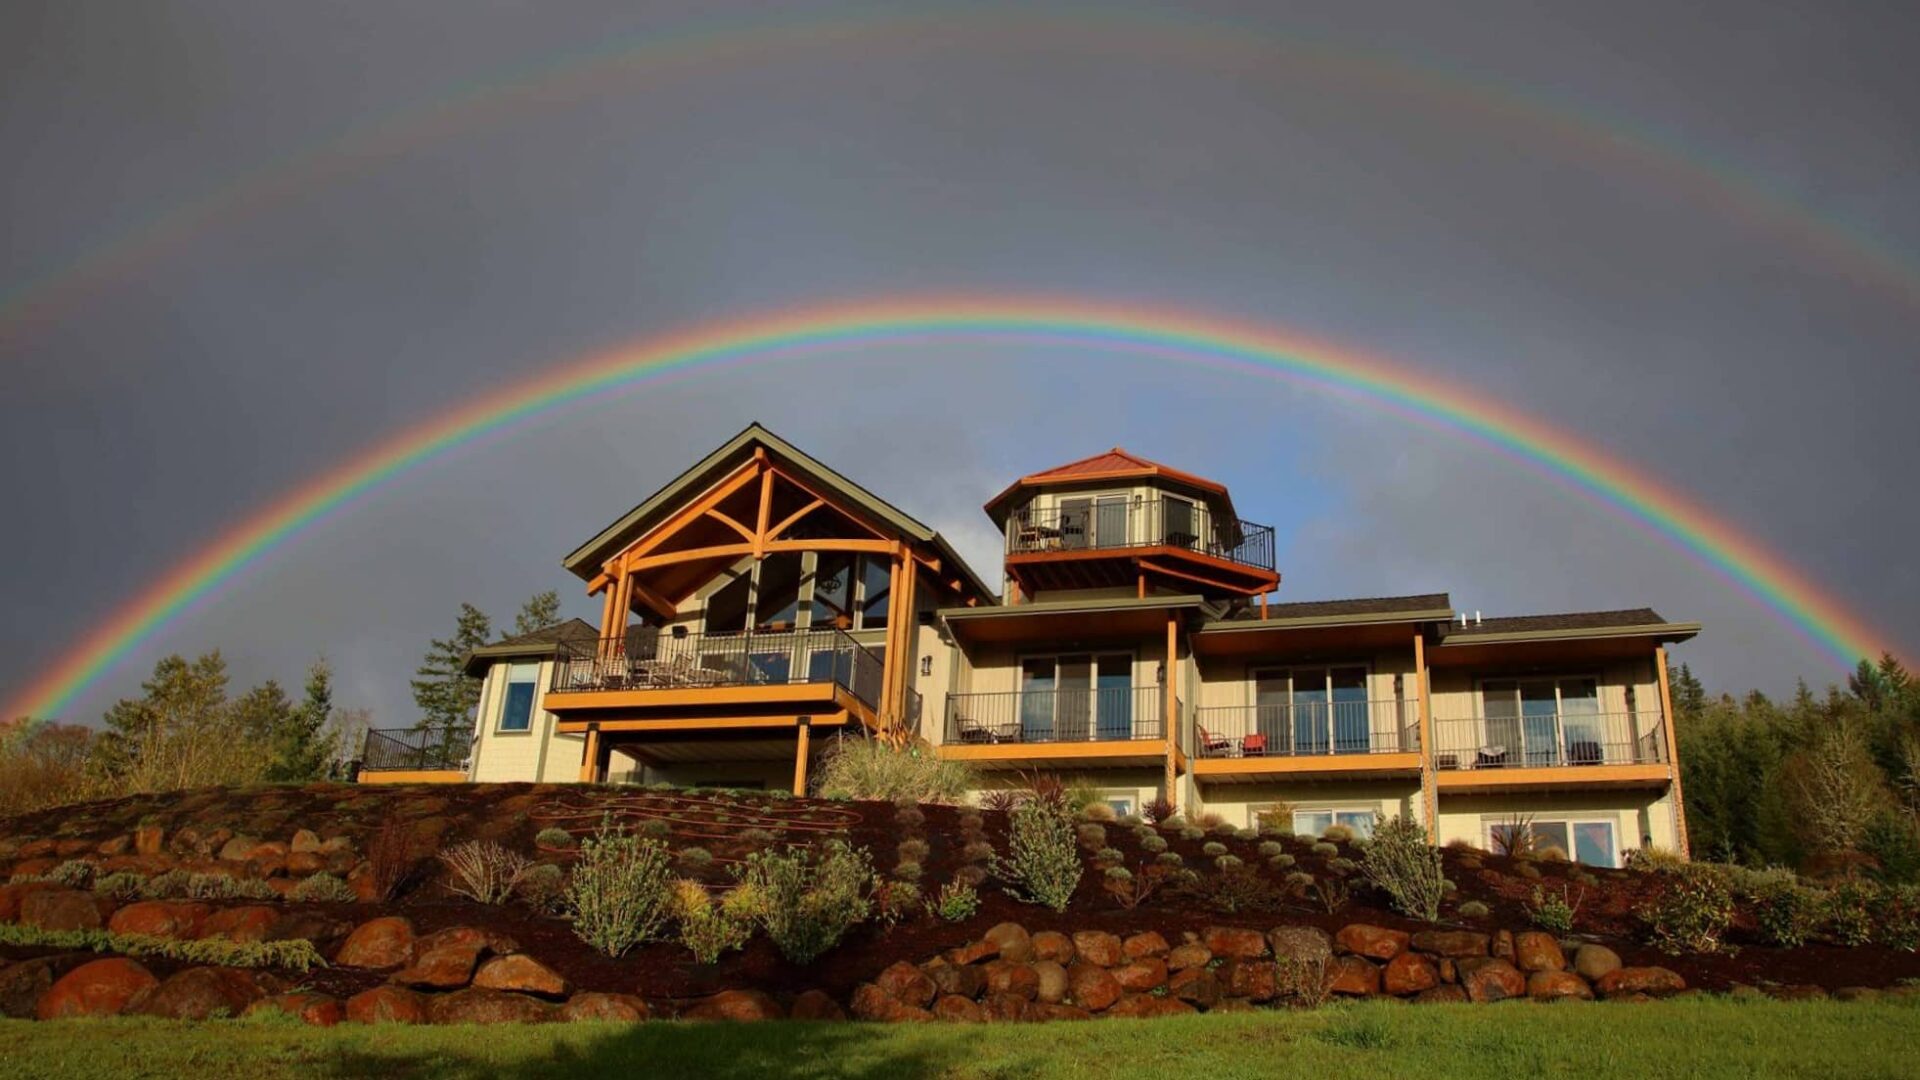 Rainbow over Bella Collina Bed and Breakfast